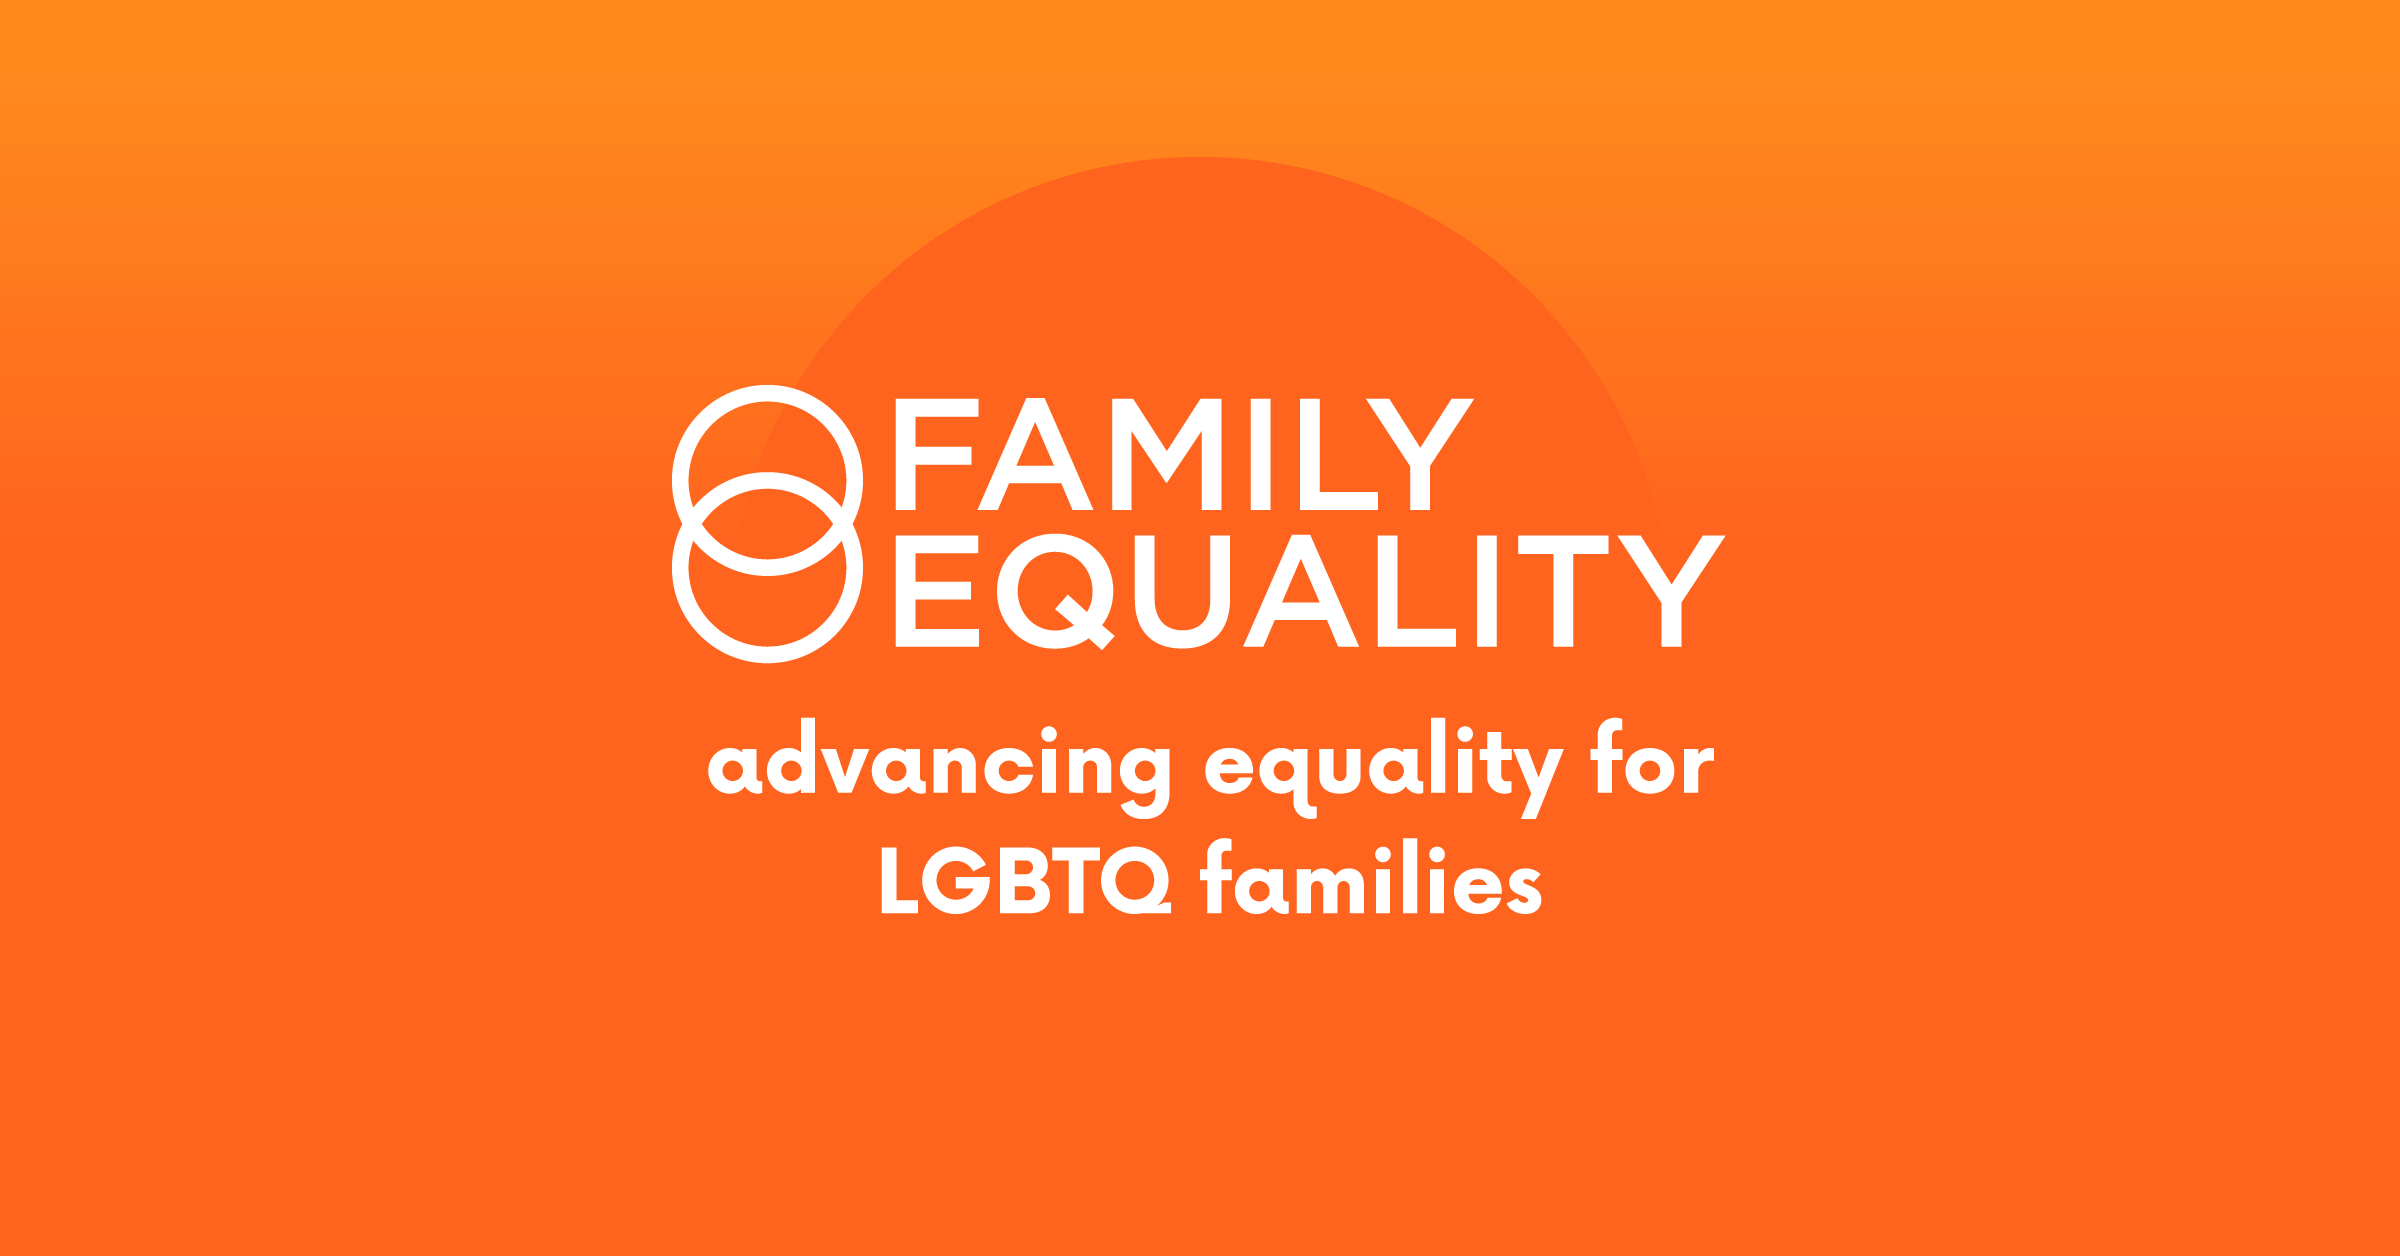 Family Equality - Advancing Equality for LGBTQ Families